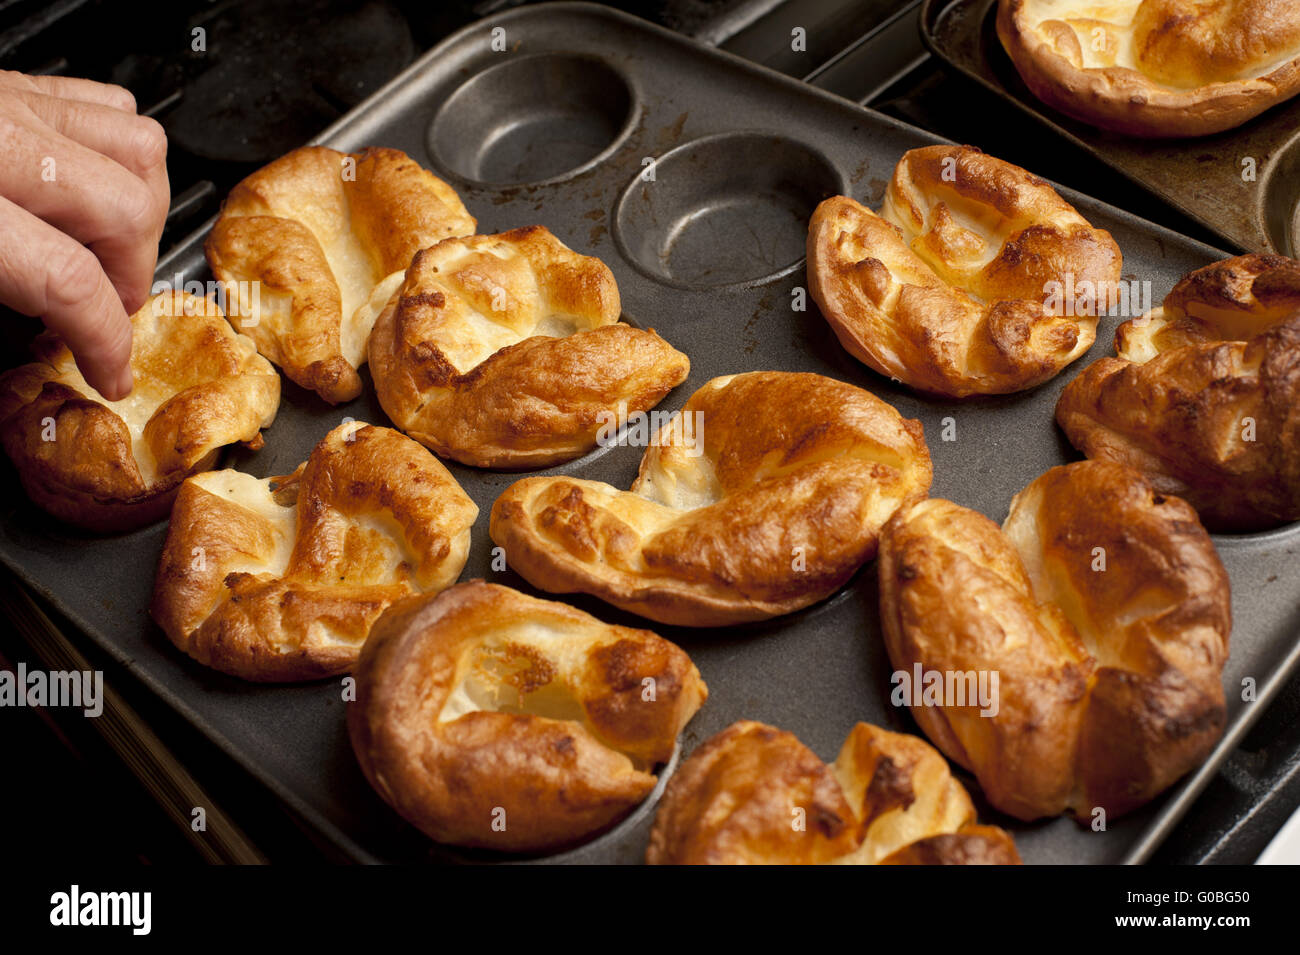 Man removing Yorkshire puddings from a baking tray Stock Photo